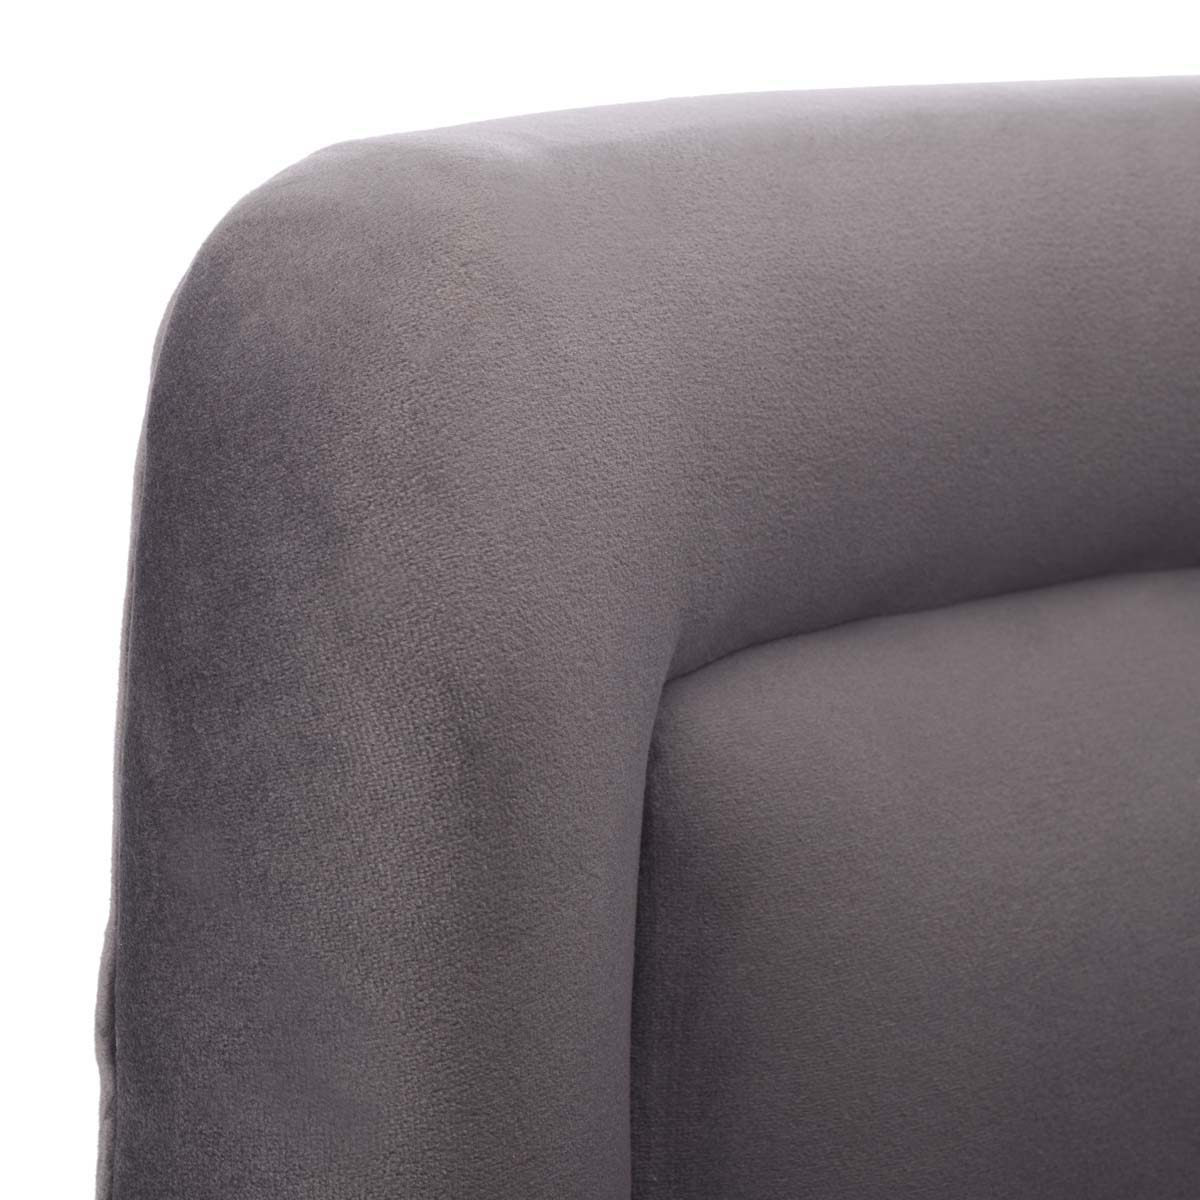 Safavieh Couture Brynlee Swivel Accent Chair